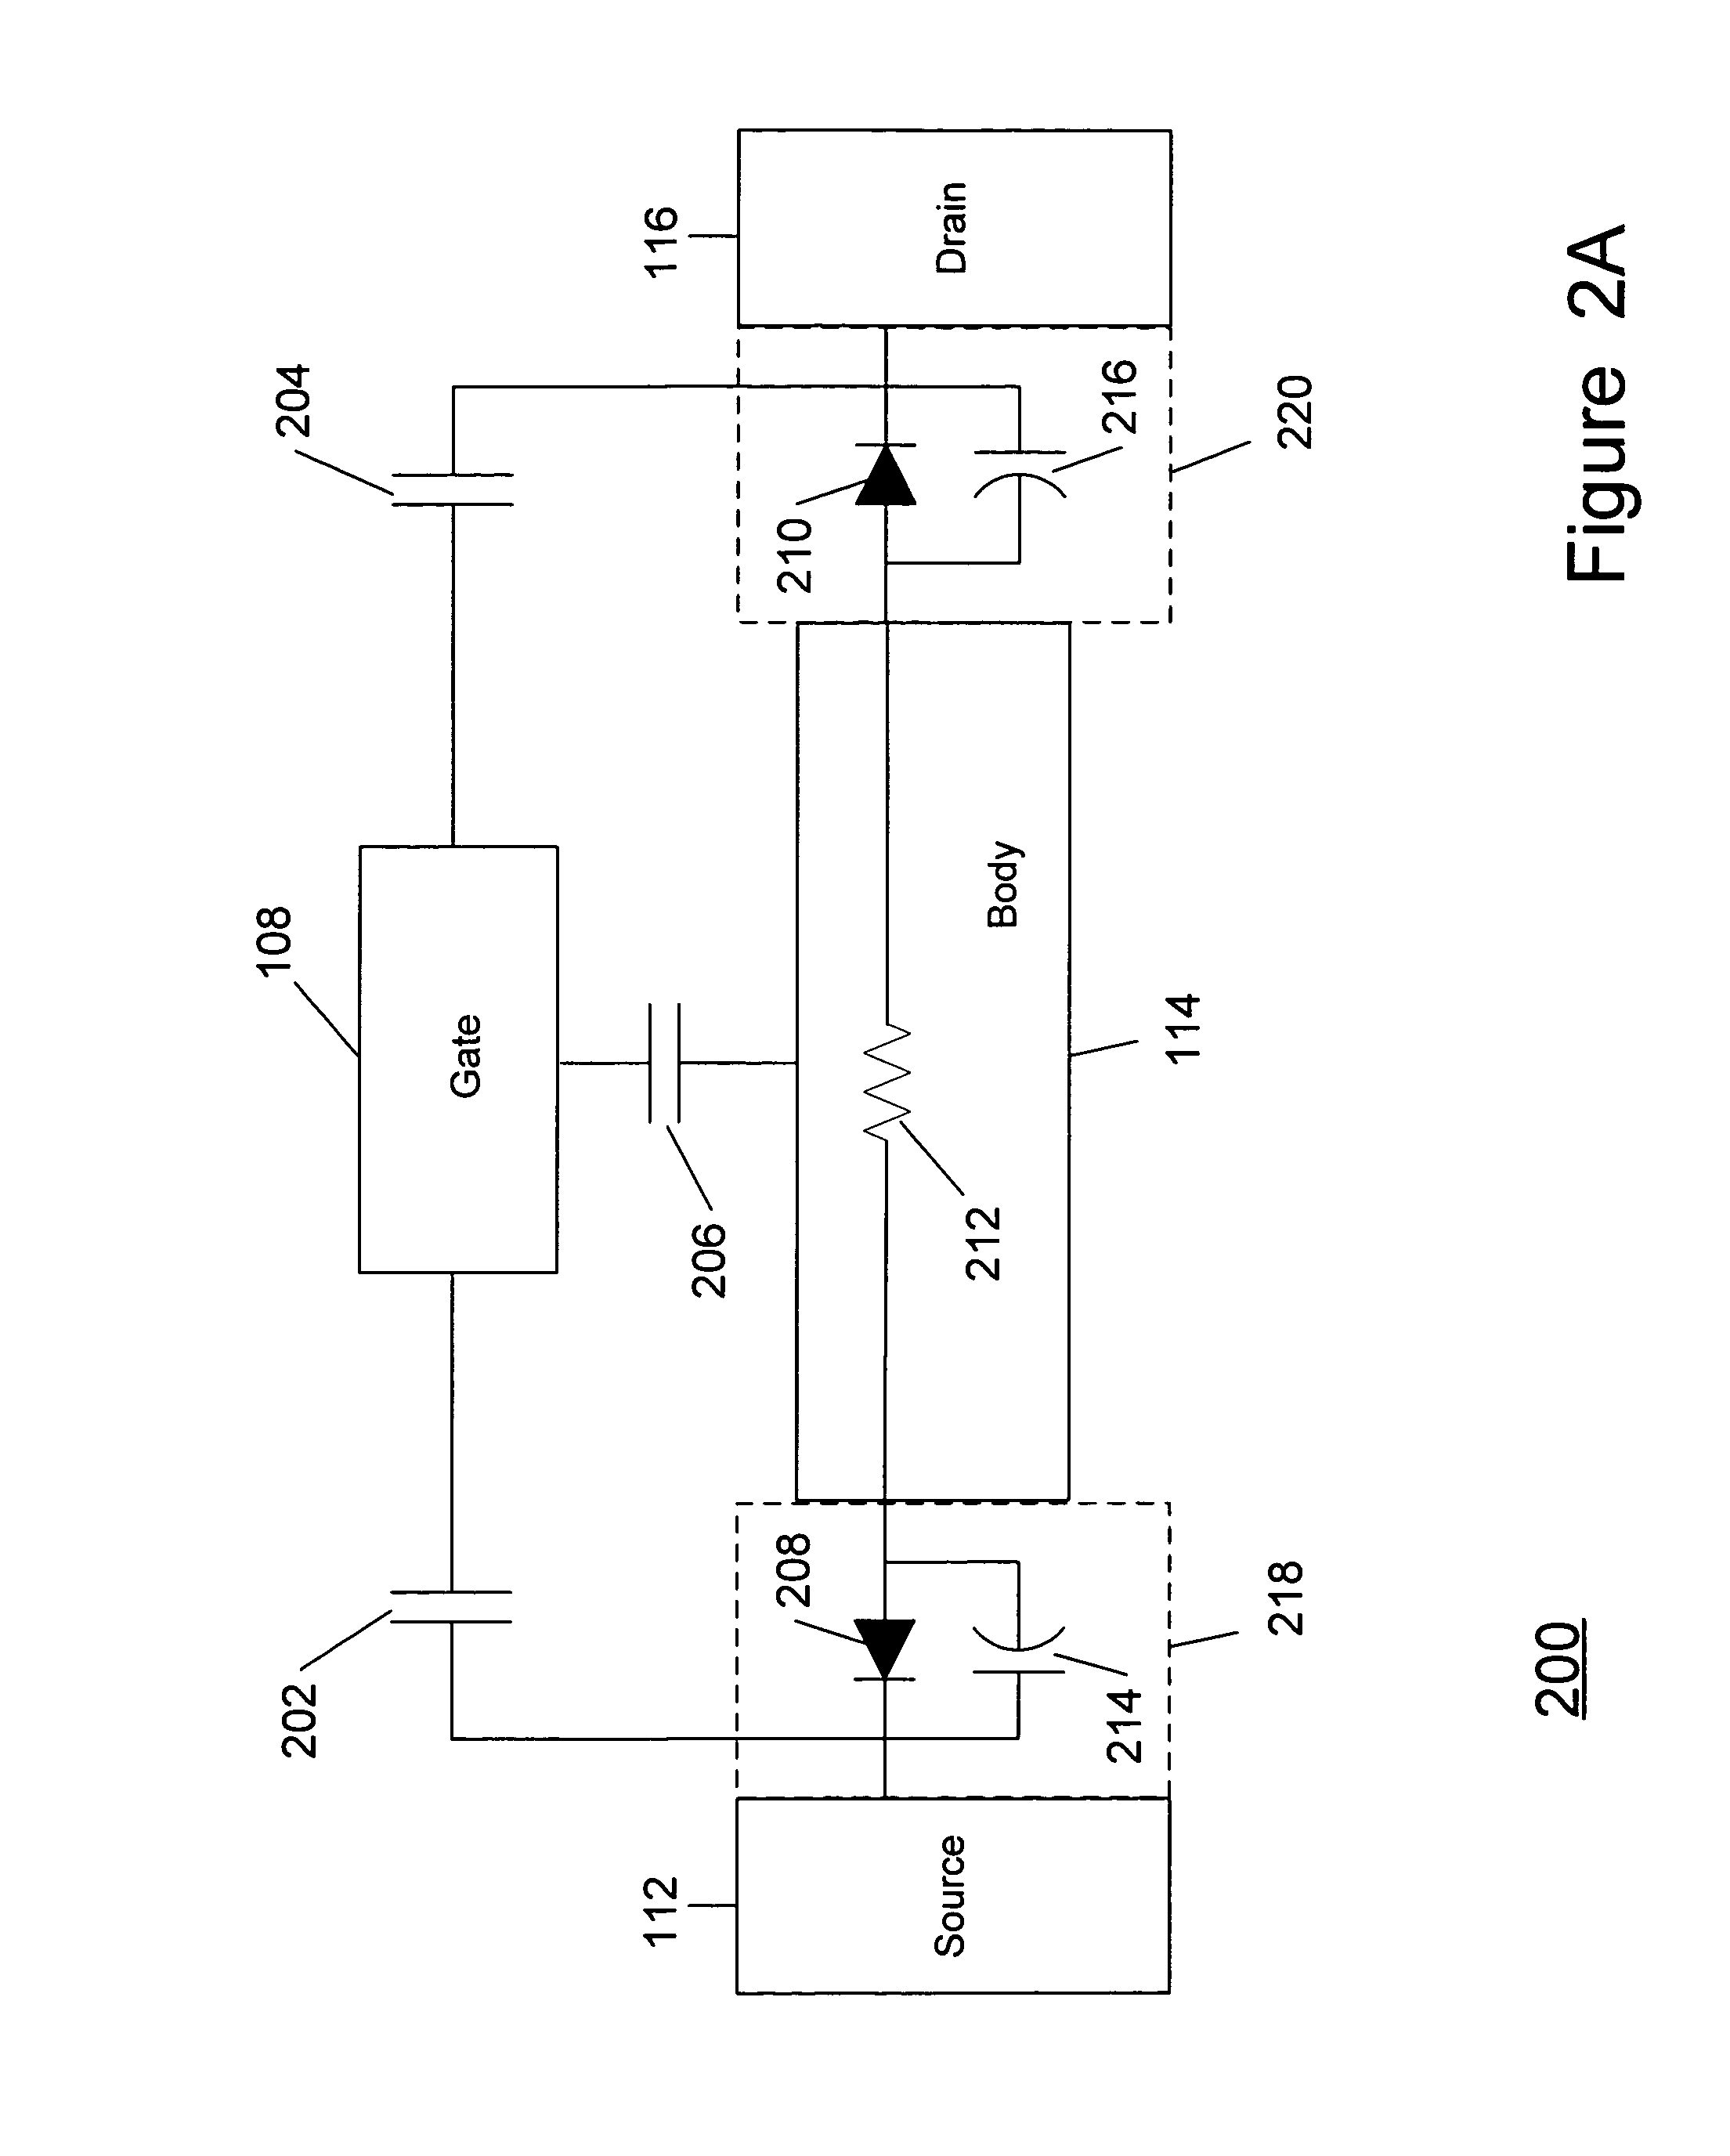 Method and apparatus improving gate oxide reliability by controlling accumulated charge